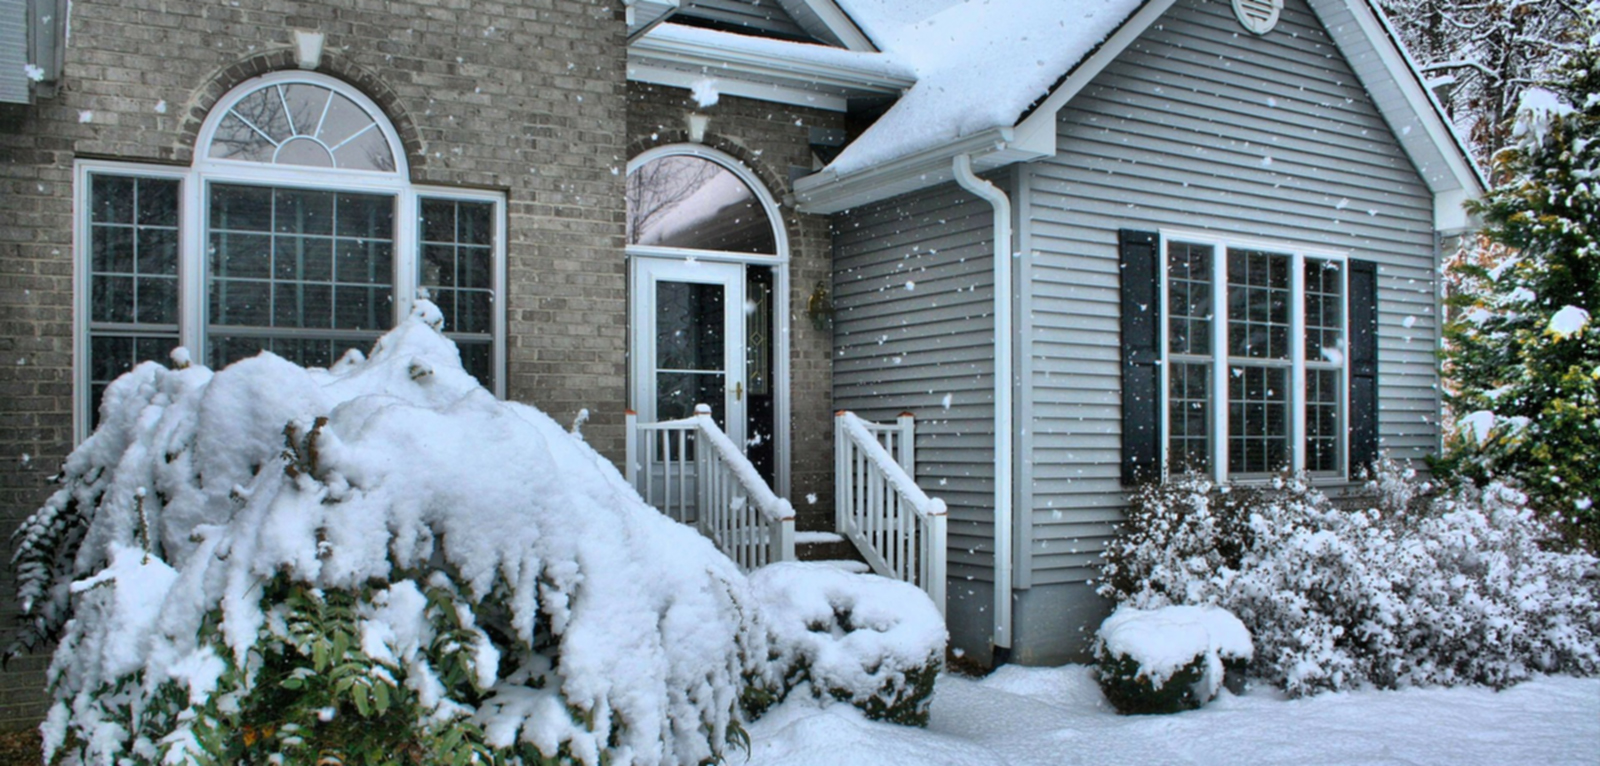 5 Tips to Get Your Home Ready for Winter Weather